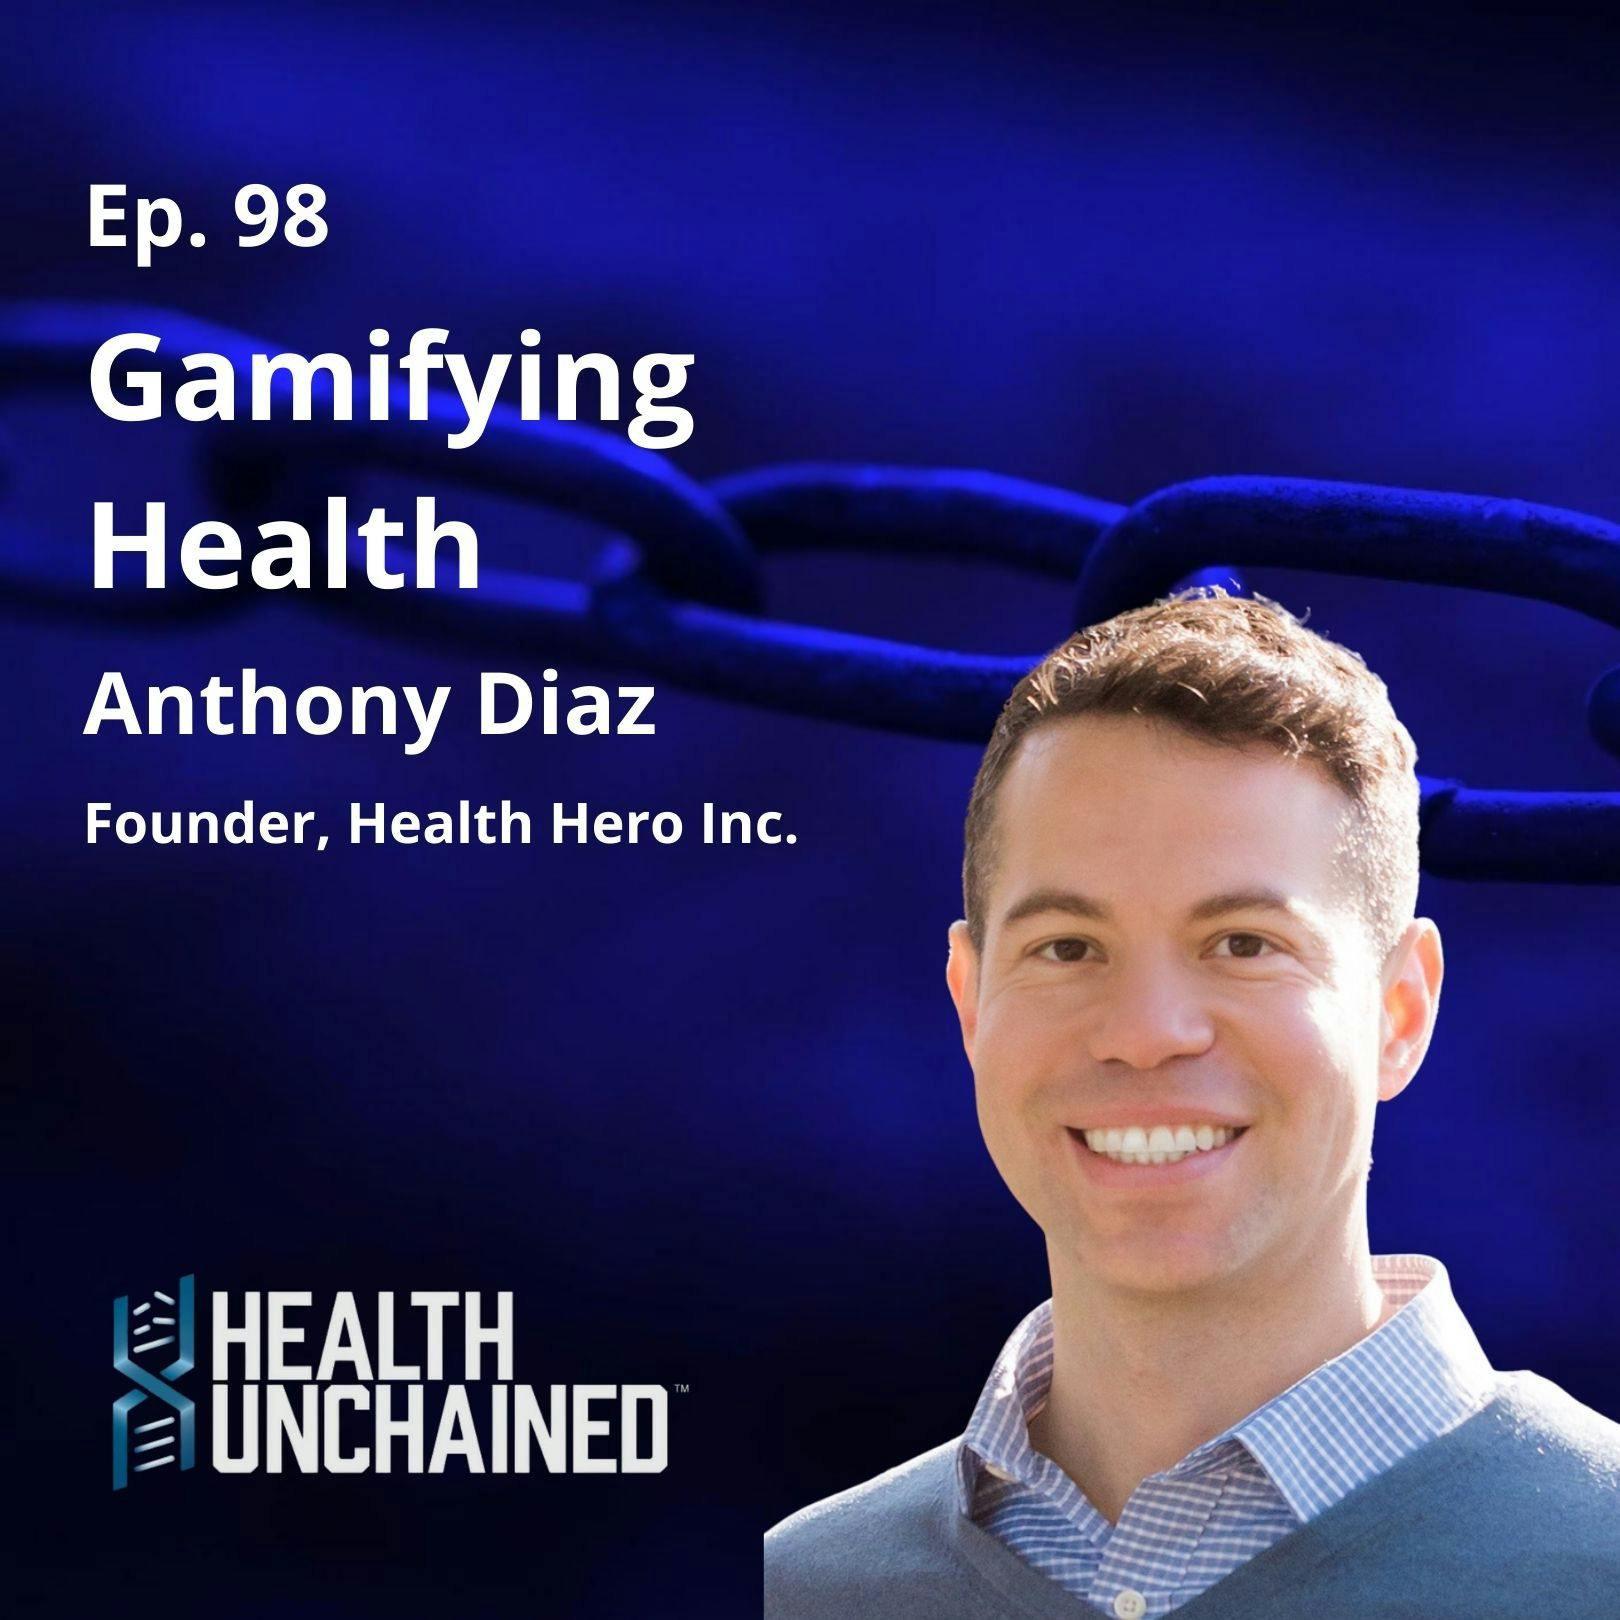 Ep. 98: Gamifying Health - Anthony Diaz (CEO of Health Hero)